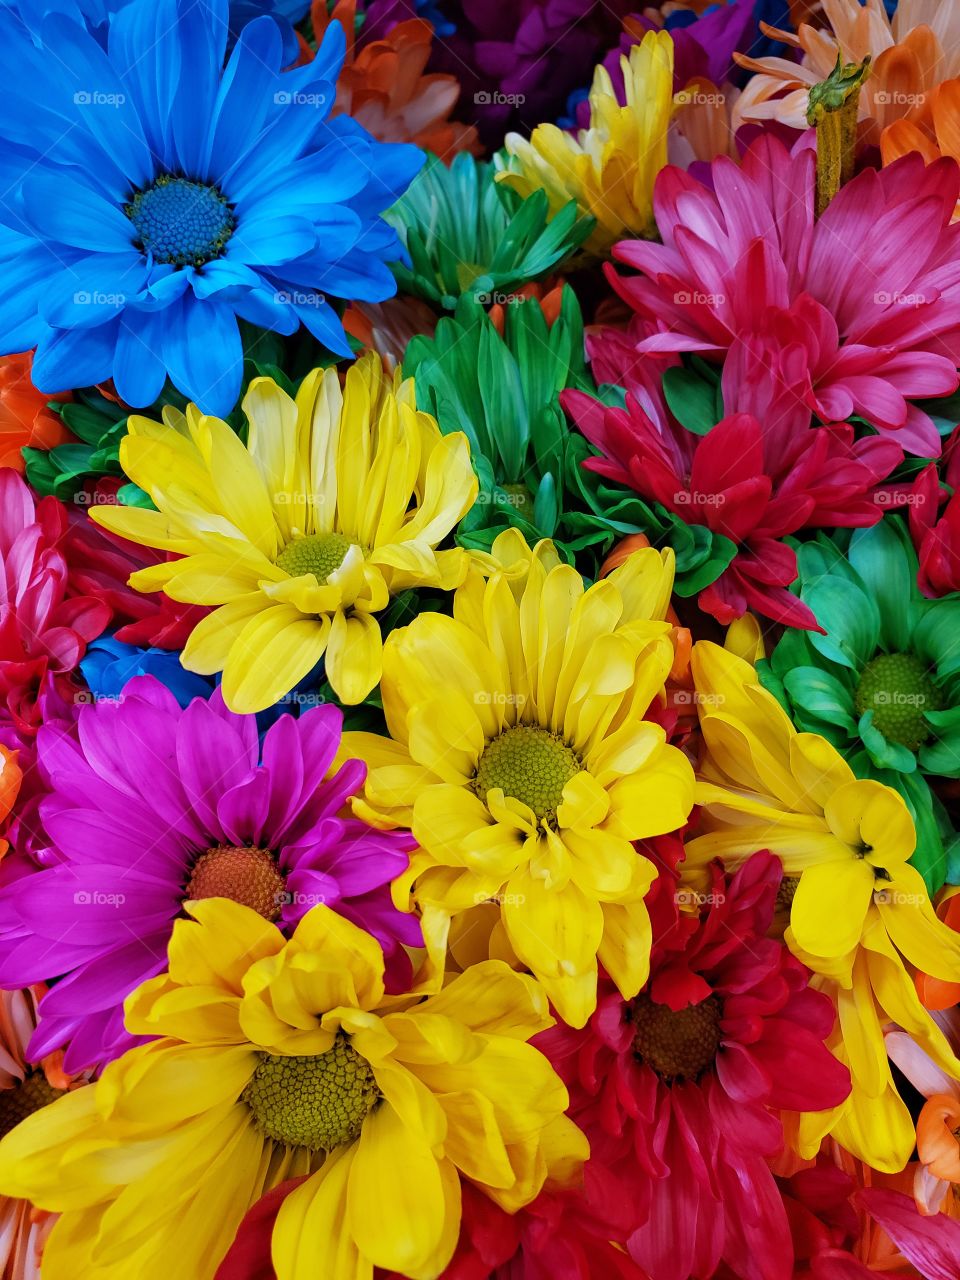 Bouquet of colorful daisies!